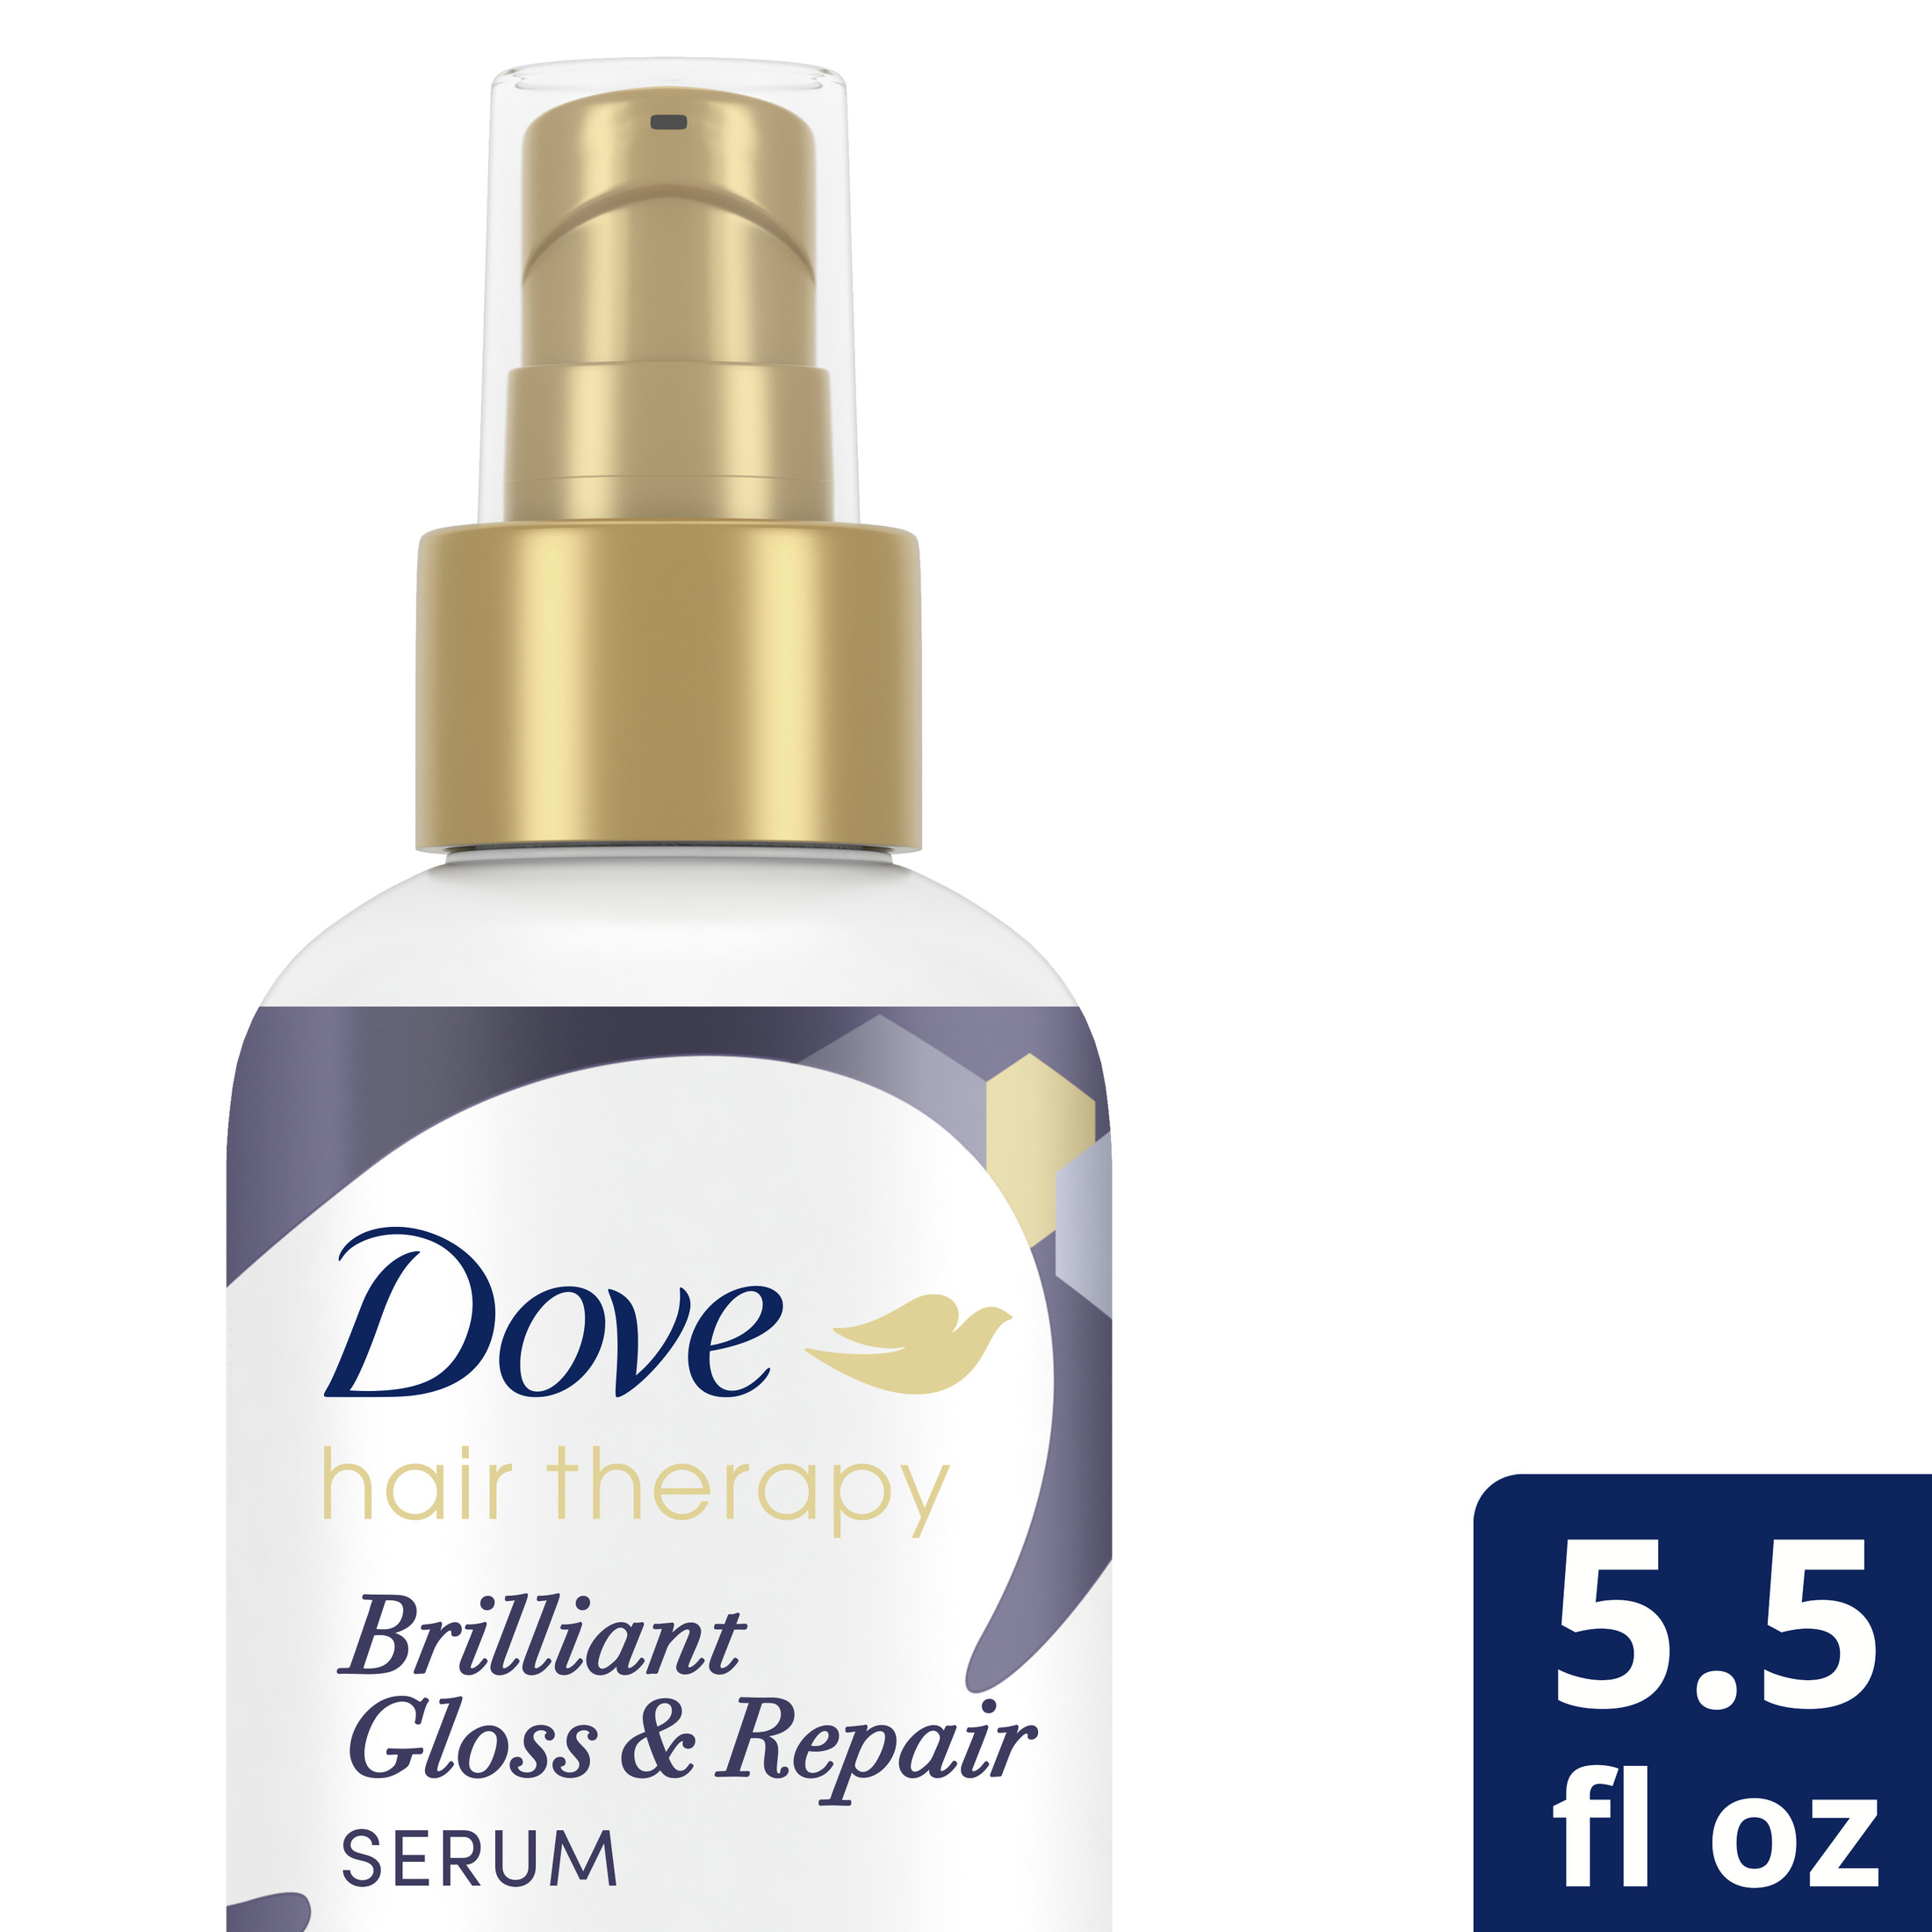 Dove Hair Therapy Brilliant Gloss & Repair Leave-in Hair Treatment, 5.5 fl oz - image 1 of 9